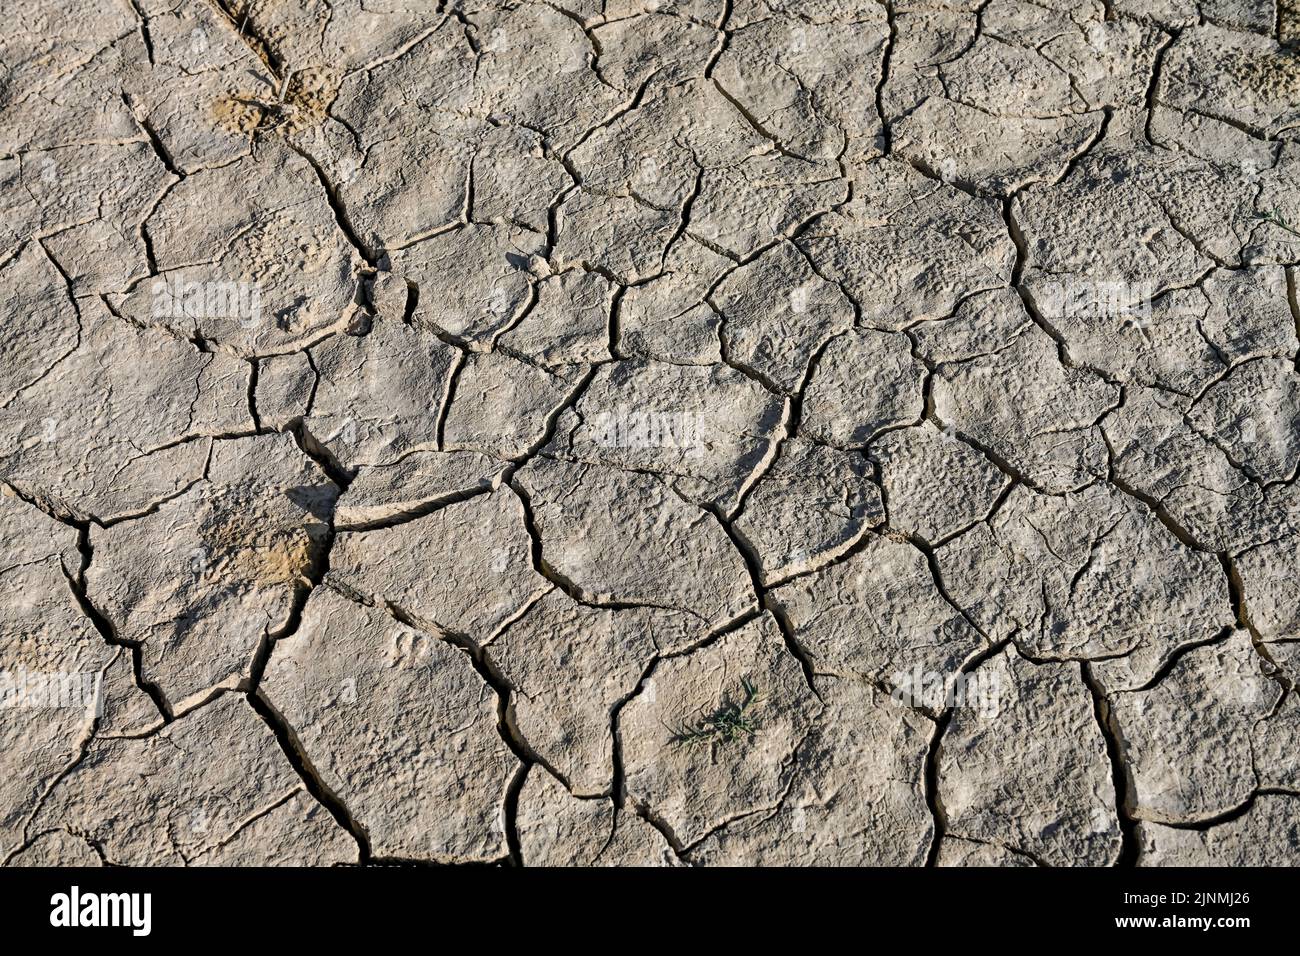 Texture of dry land in southern Europe. Global warming and greenhouse effect. Stock Photo